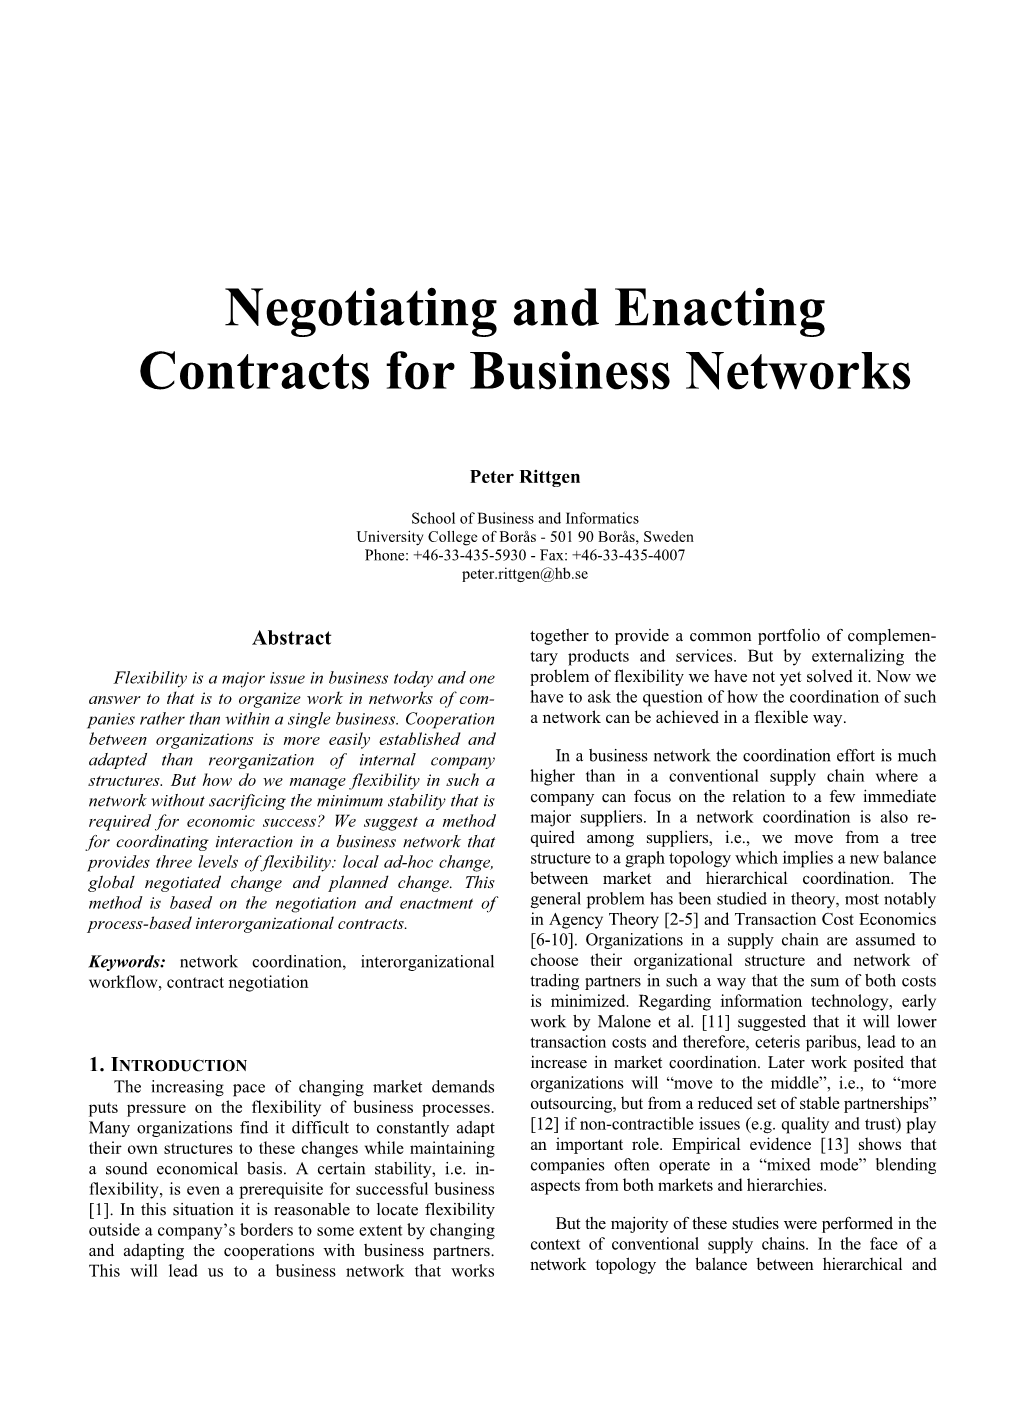 Negotiating and Enacting Contracts for Business Networks